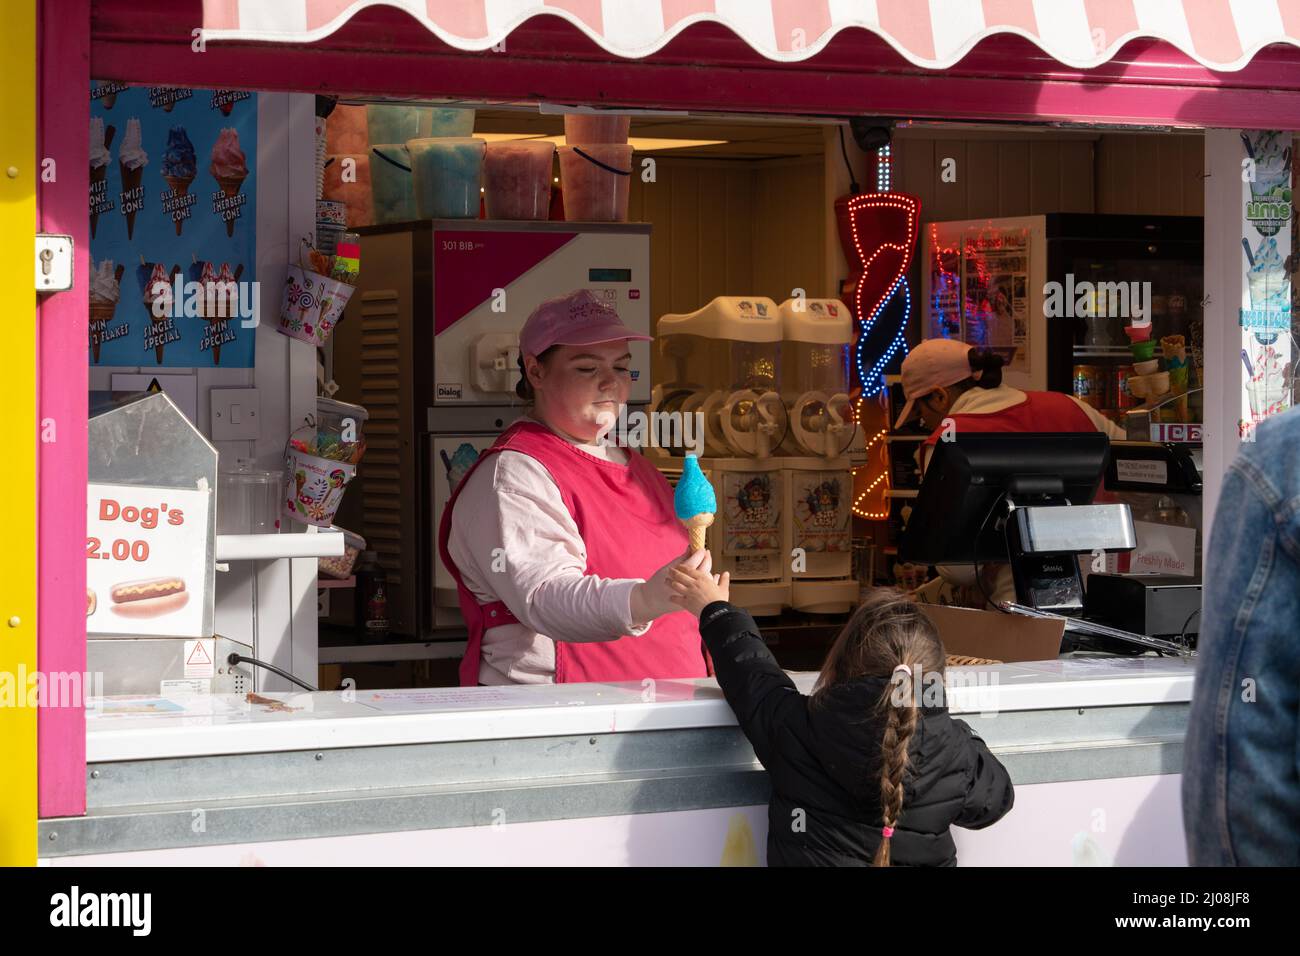 An ice cream seller at a seaside kiosk passes a blue ice cream in a cone to a young girl with a long plait. Staycations continue to be popular in UK. Stock Photo